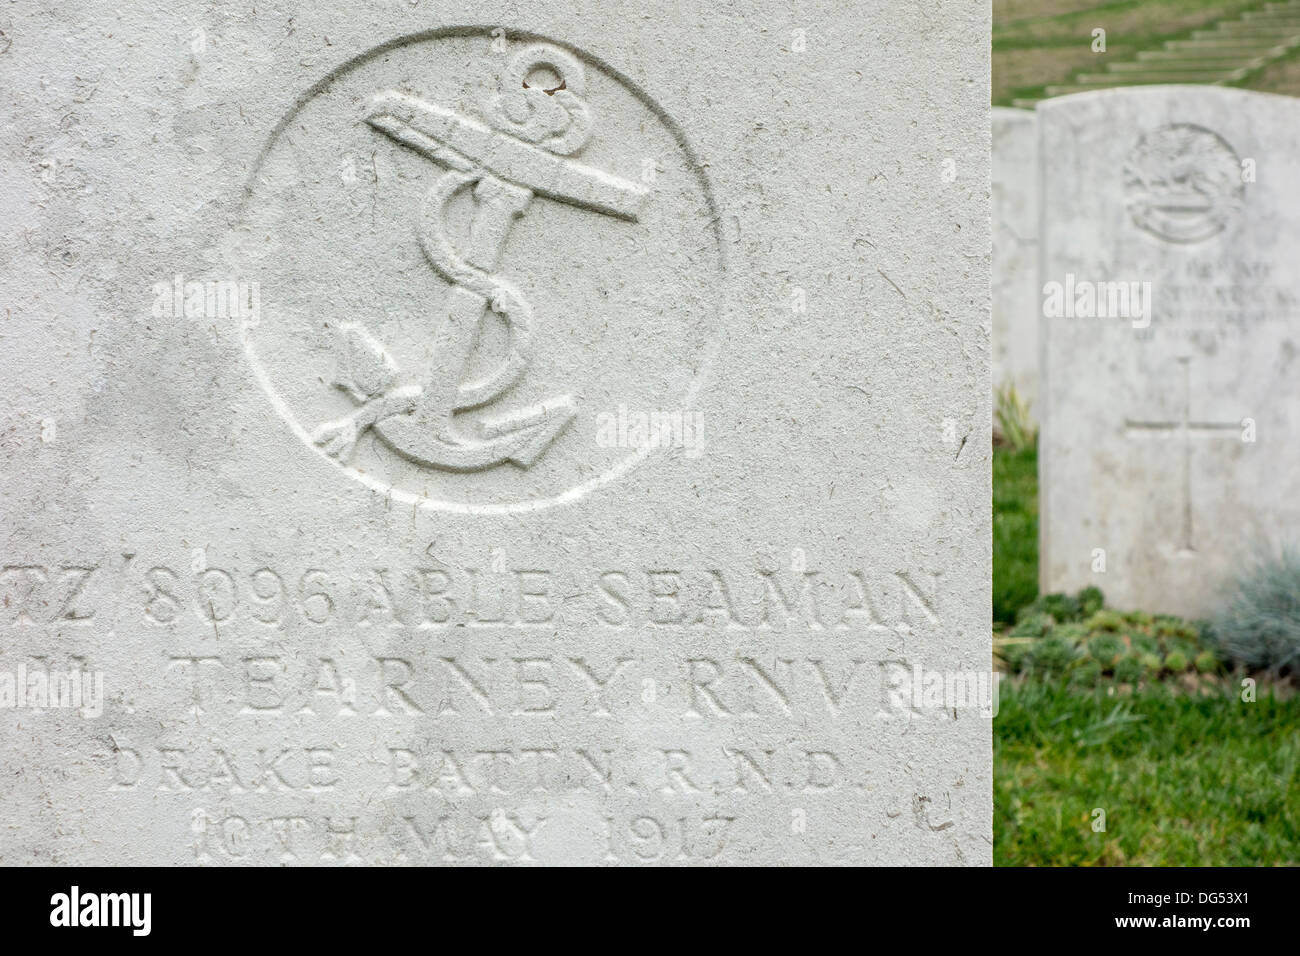 Drake Battalion RND / Royal Naval Division regimental badge on headstone at Cemetery of the Commonwealth War Graves Commission Stock Photo